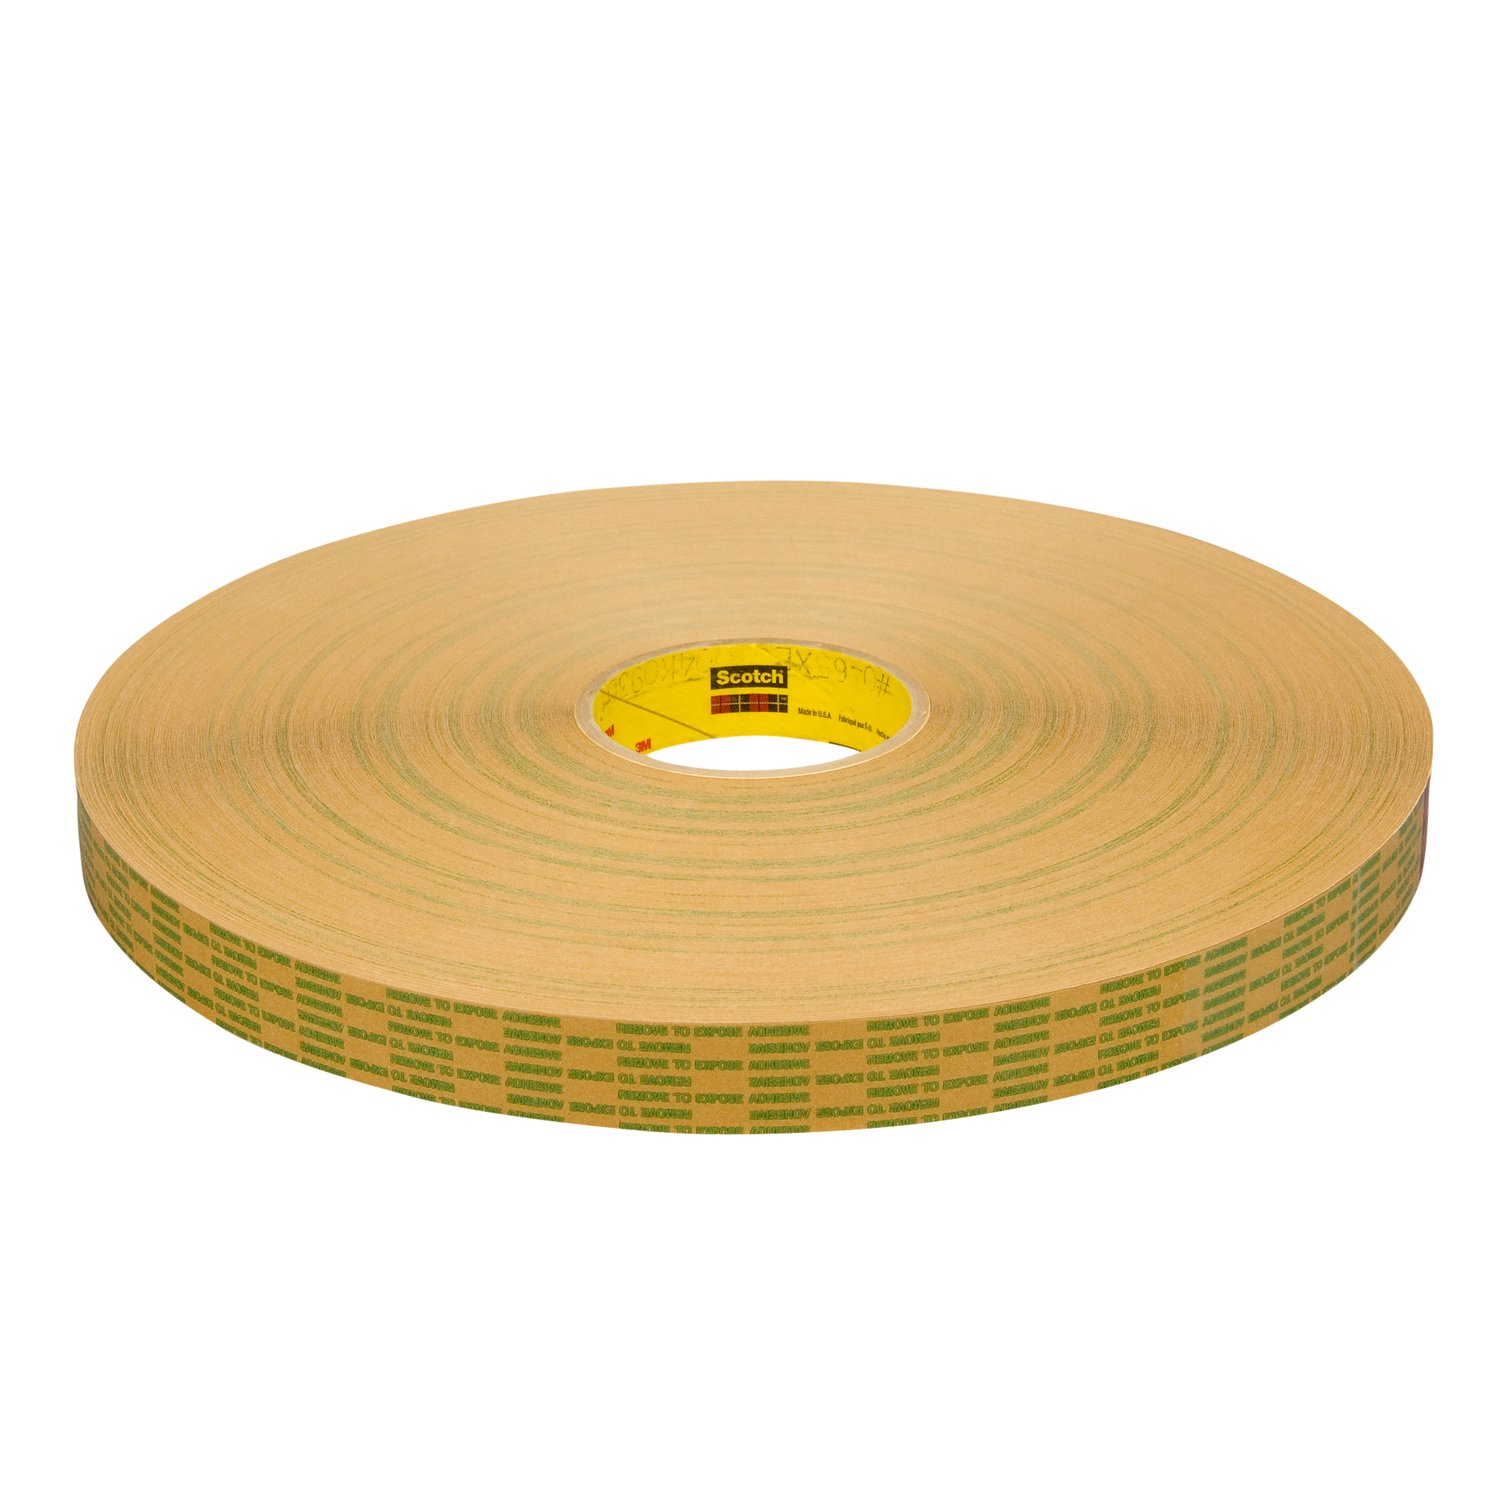 7010311773 - 3M Adhesive Transfer Tape Extended Liner 465XL, Translucent, 1/2 in x
60 yd, 2 mil, 72 per case